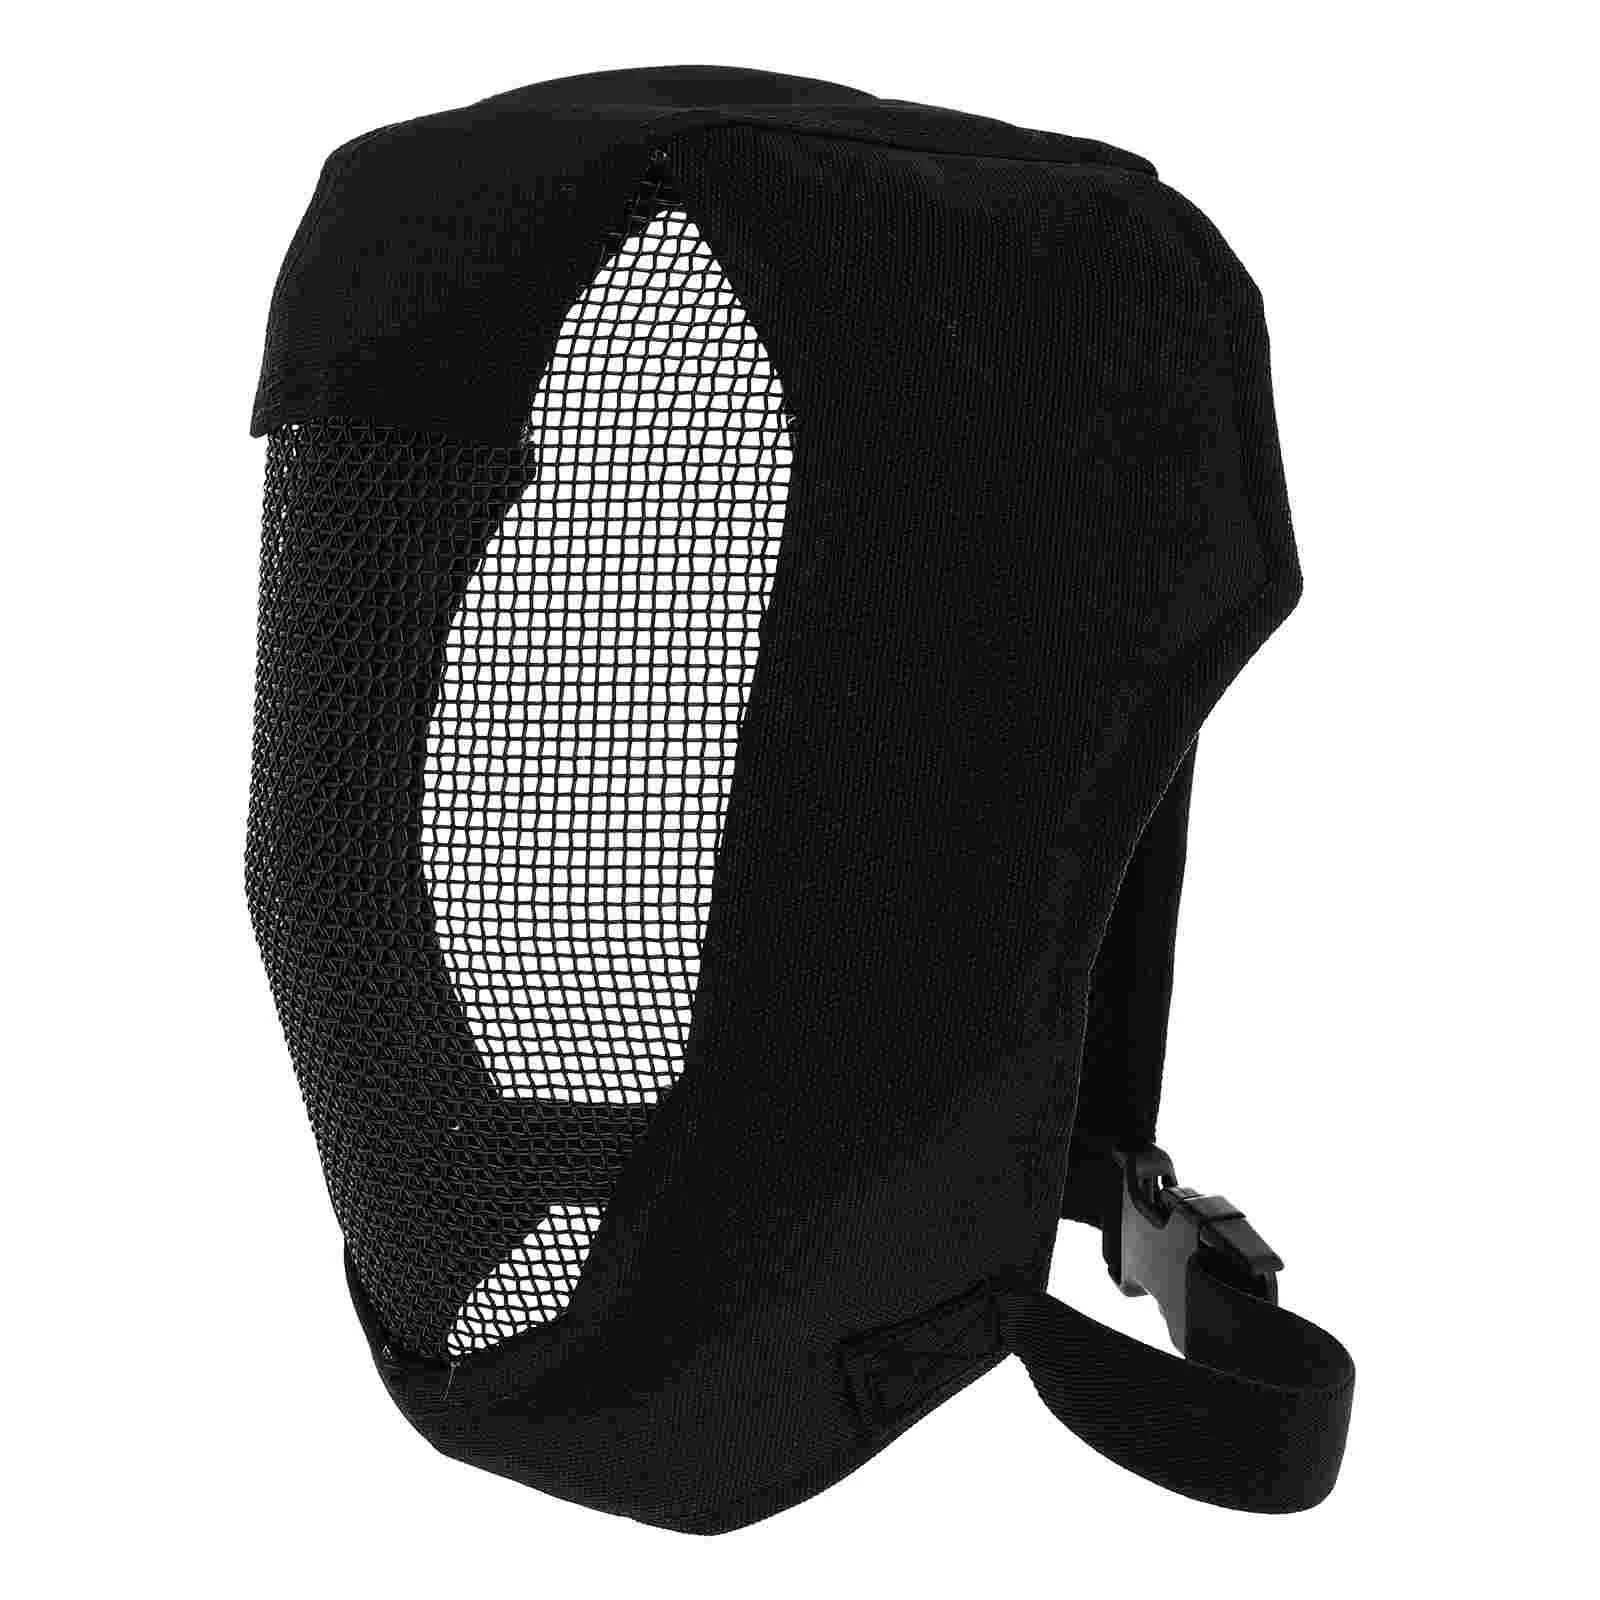 

Game Mask Outdoor Field Headgear Full Mesh Tactics Cover Face-shield Protective Guard